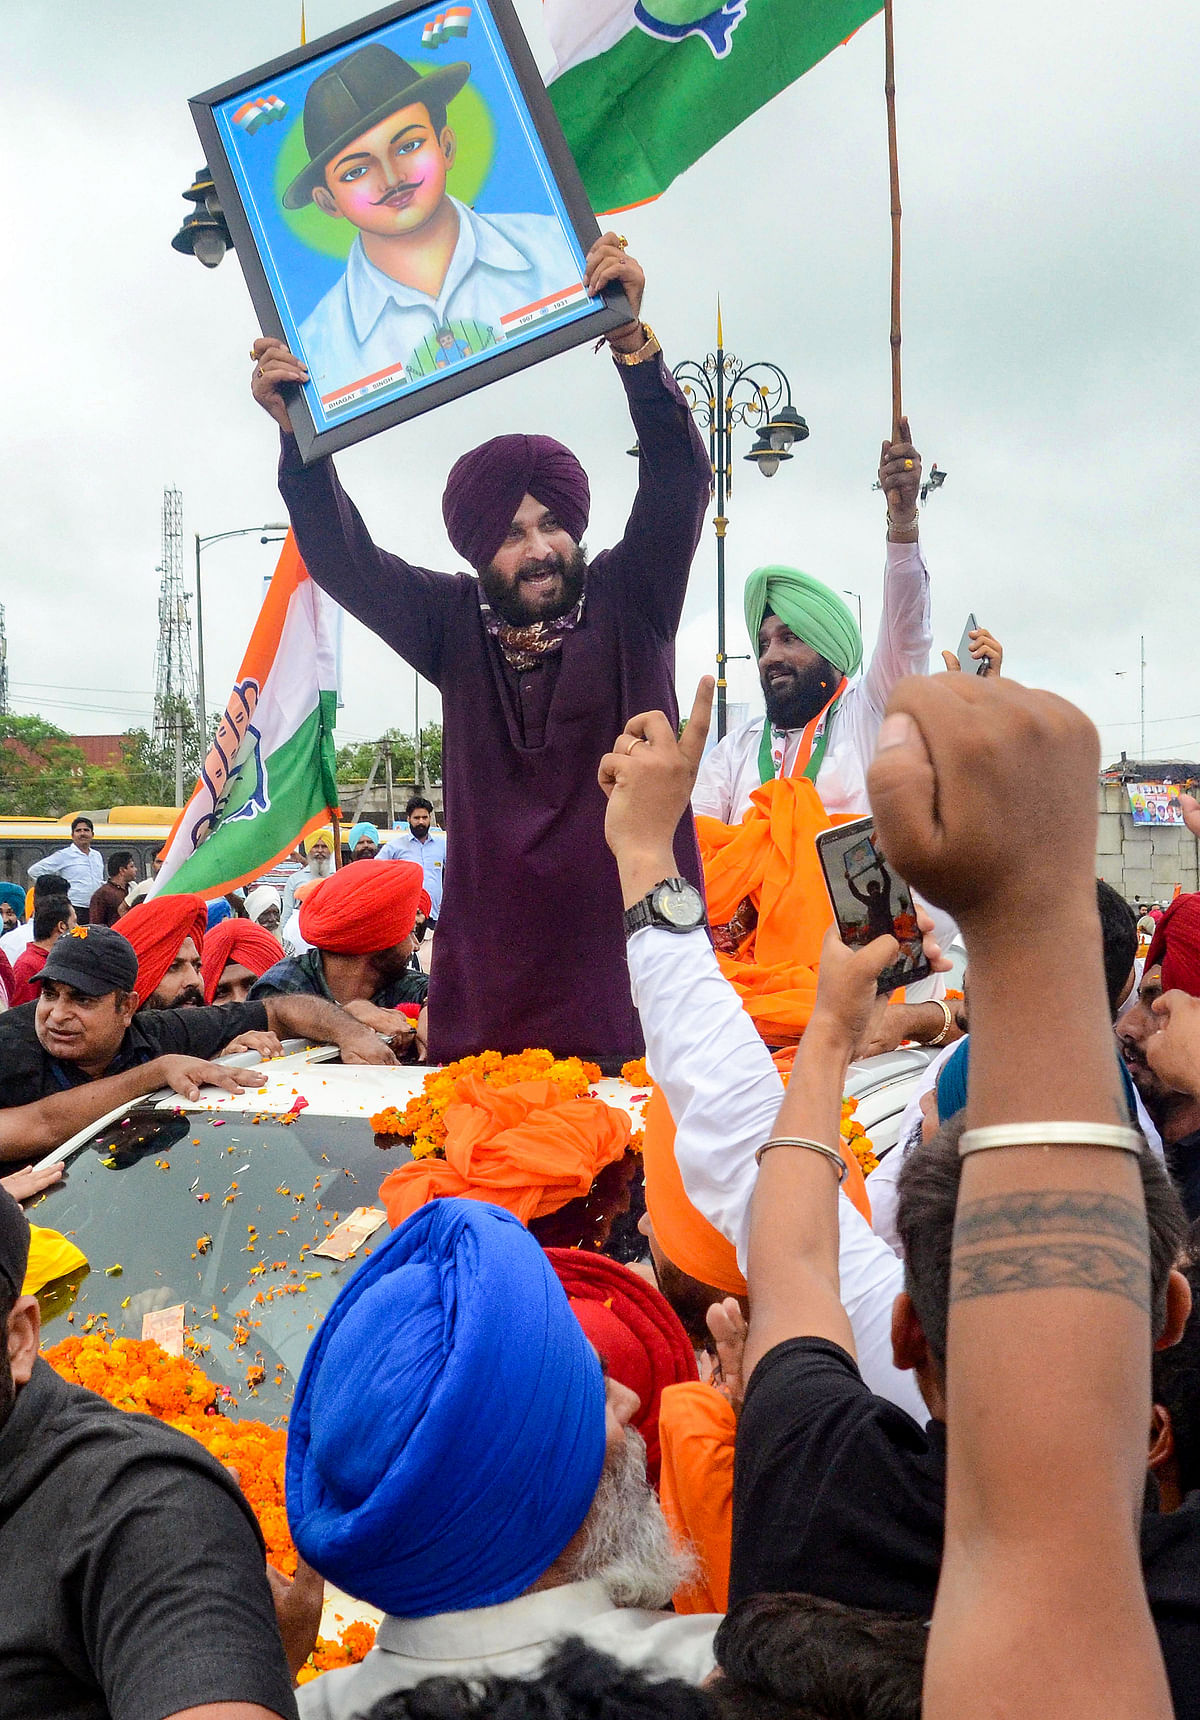 The original image shows Sidhu holding freedom fighter Bhagat Singh's poster at a roadshow in Amritsar on 20 July.